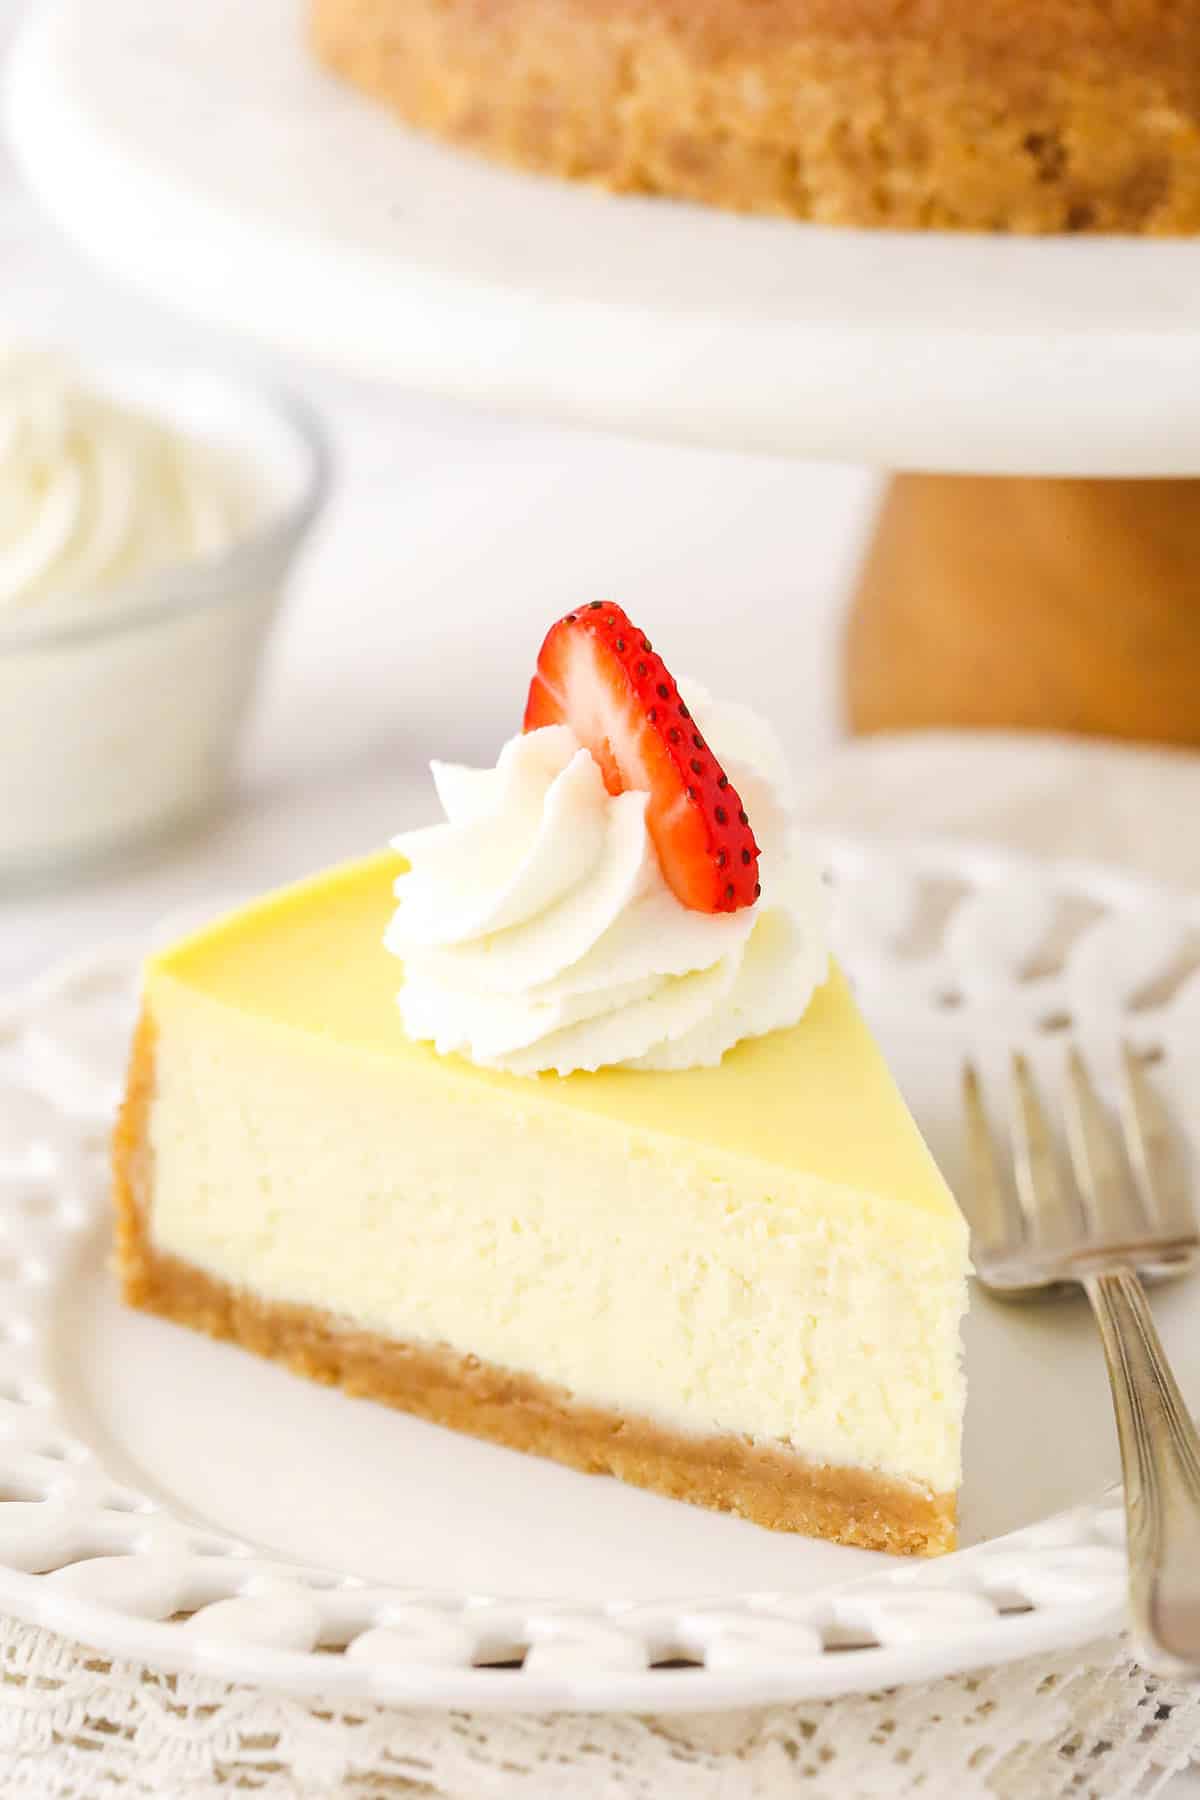 A slice of homemade cheese cake with whipped cream and strawberries